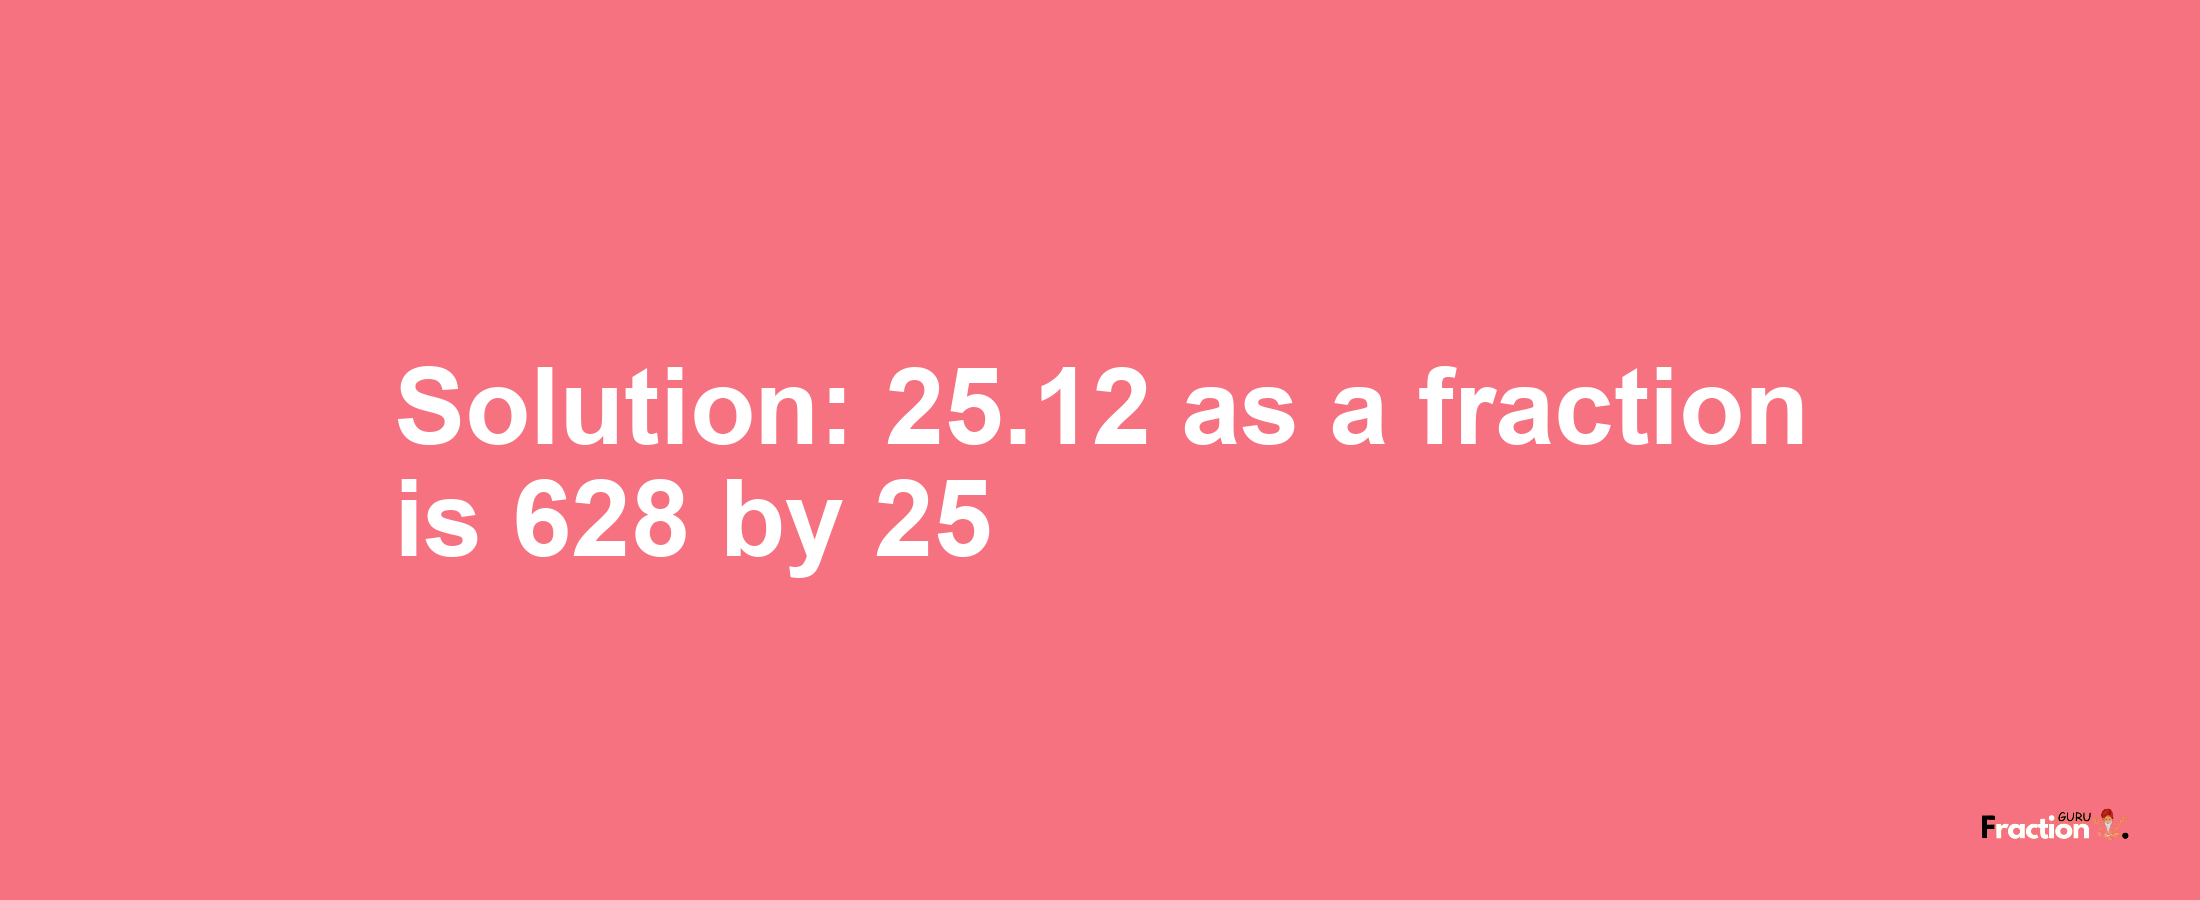 Solution:25.12 as a fraction is 628/25